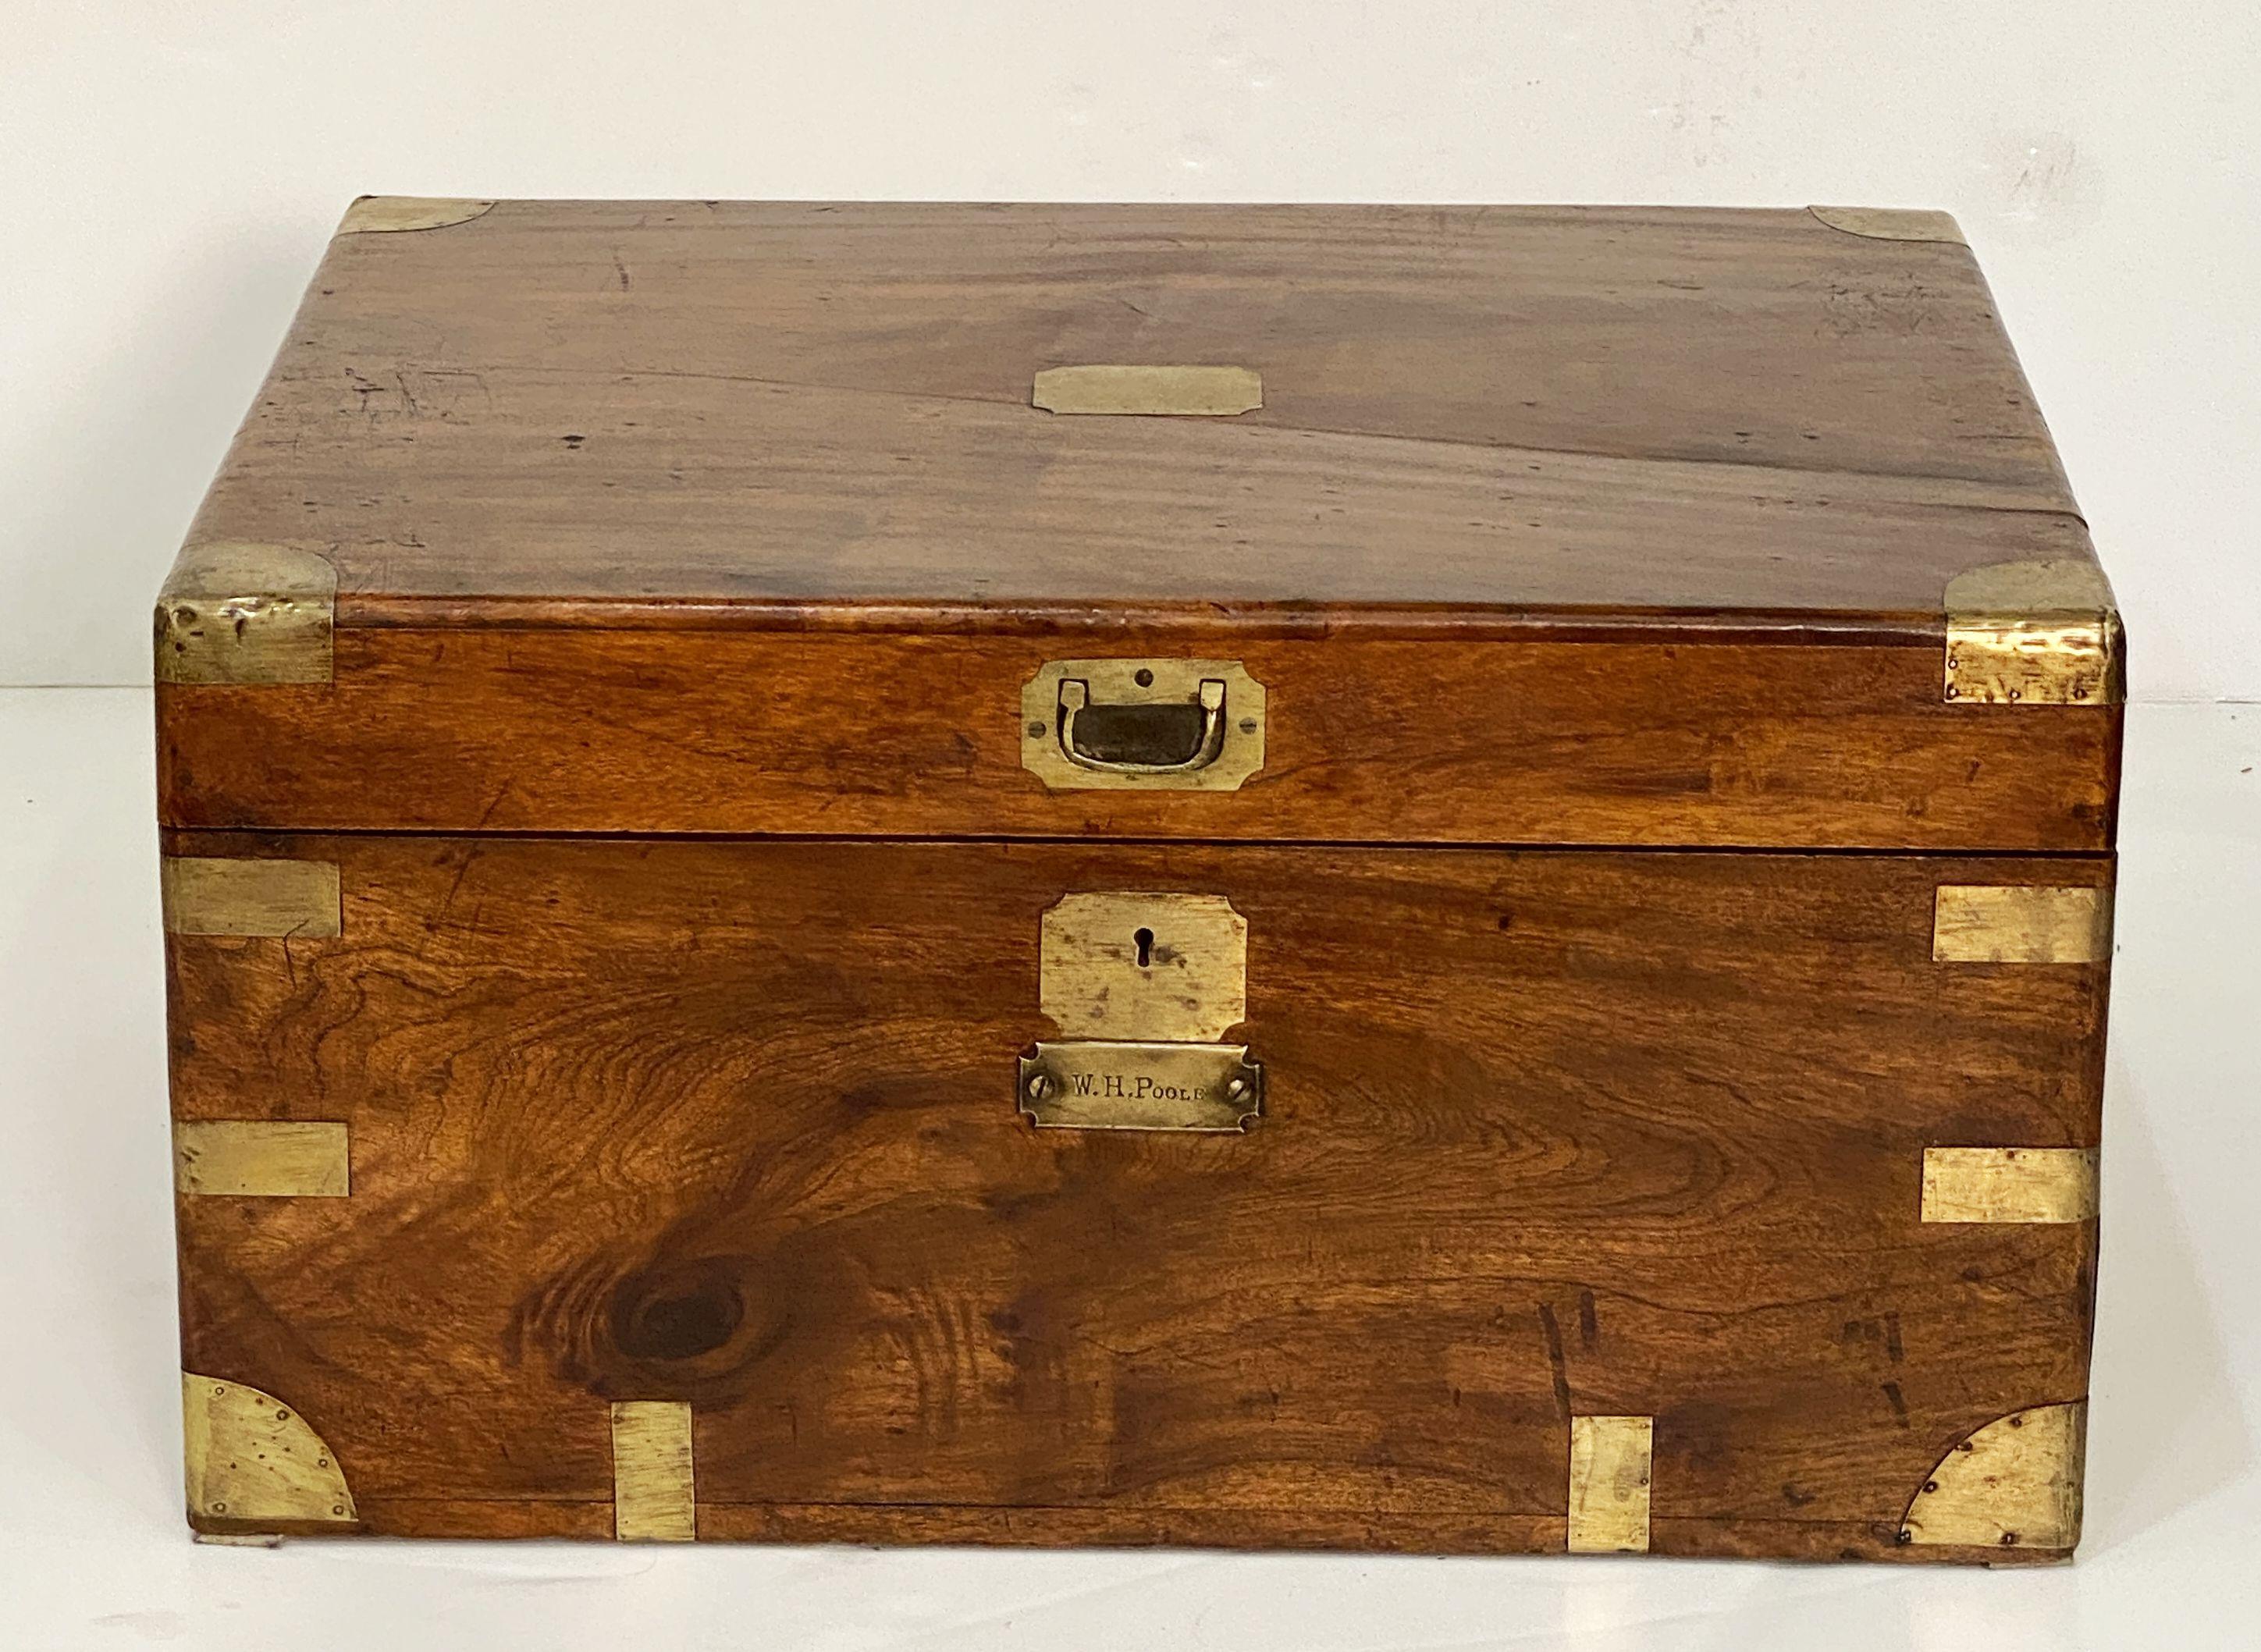 A handsome rectangular British military officer's Campaign trunk of camphorwood featuring hand-cut brass binding and hardware, with opposing handles of iron.

With brass name-plate marked: W.H. Poole

Campaign-era trunks and coffers were the travel